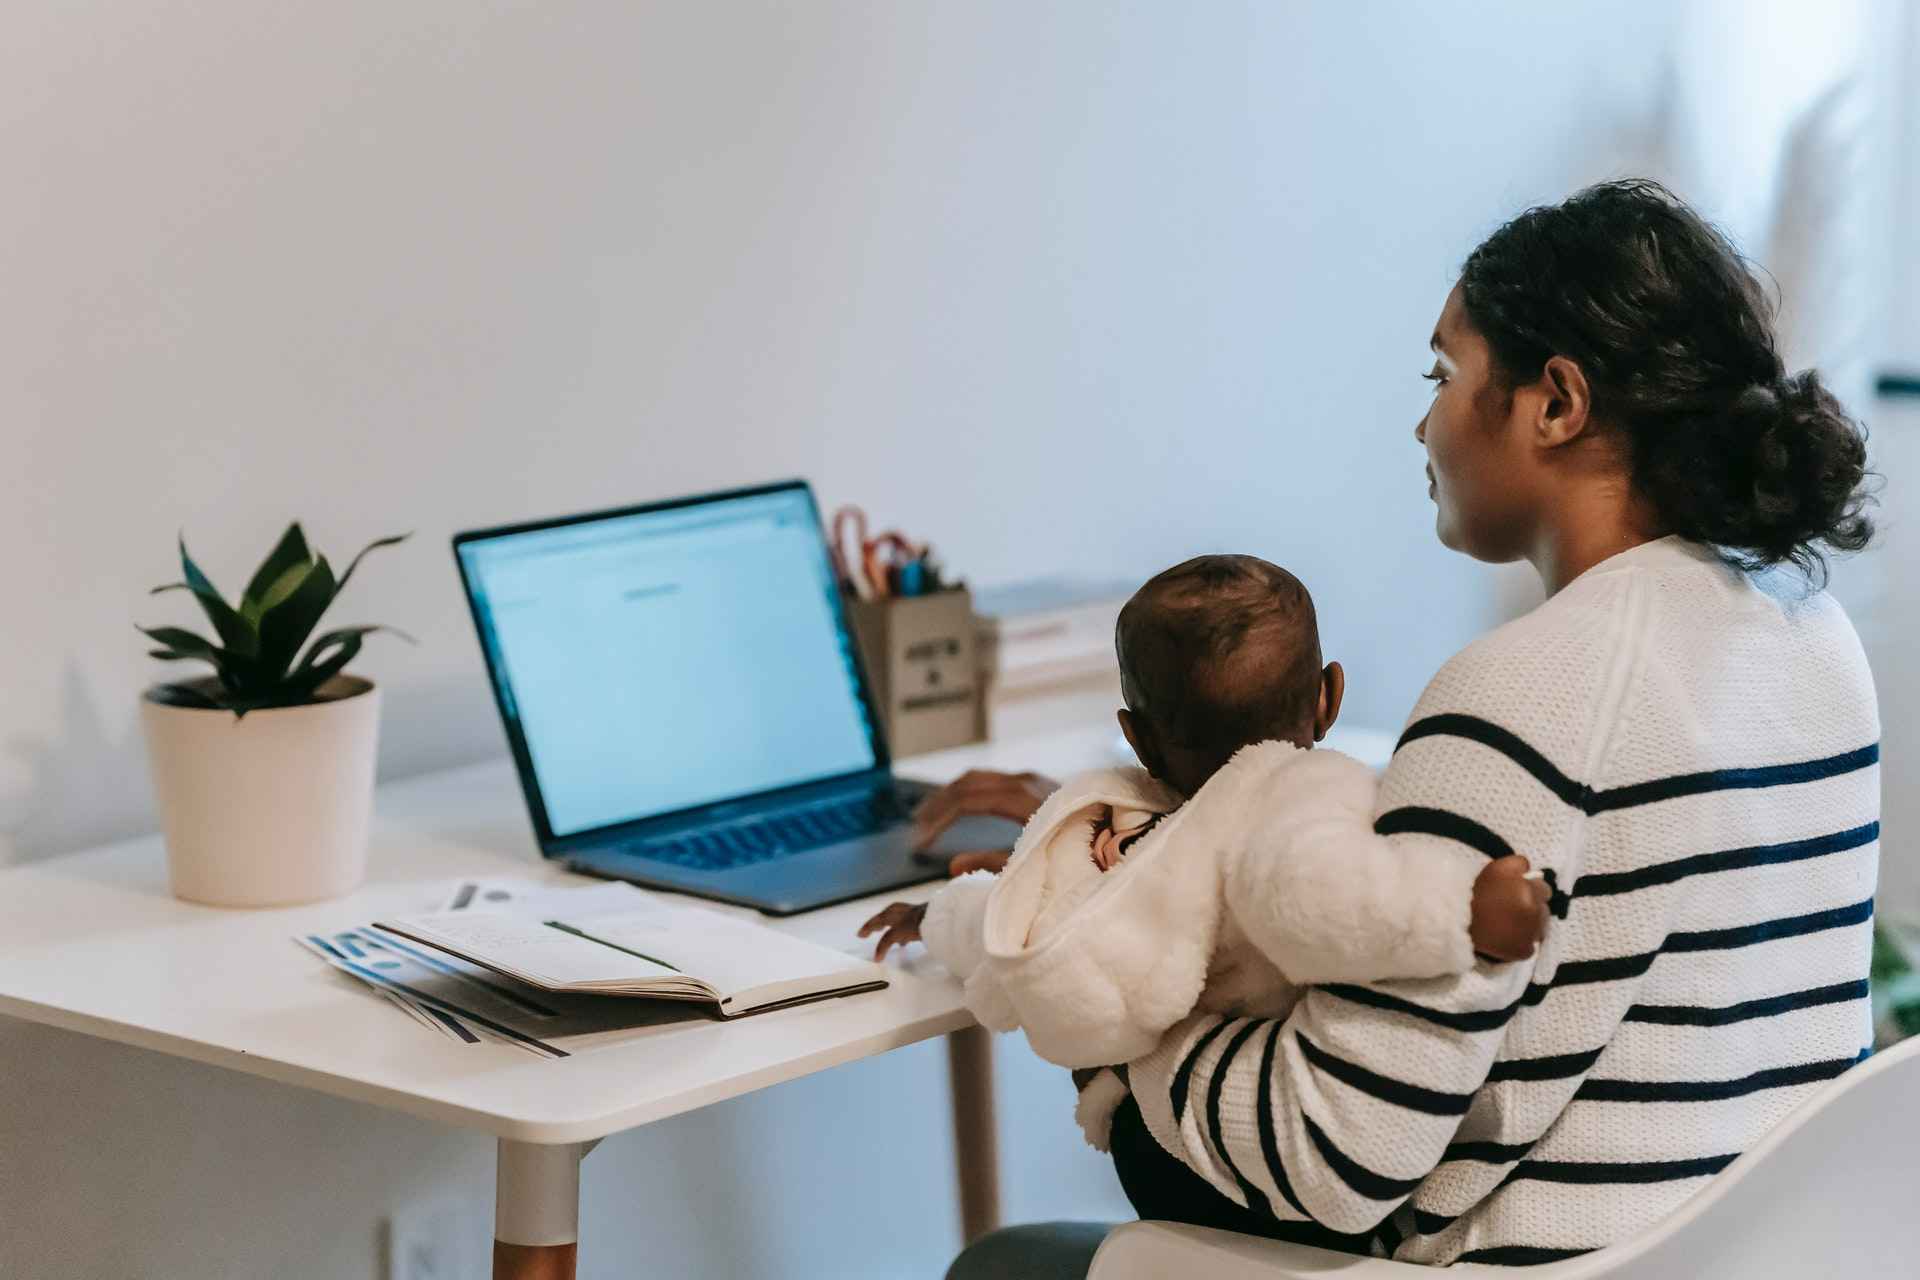 How to support working mothers in the workplace